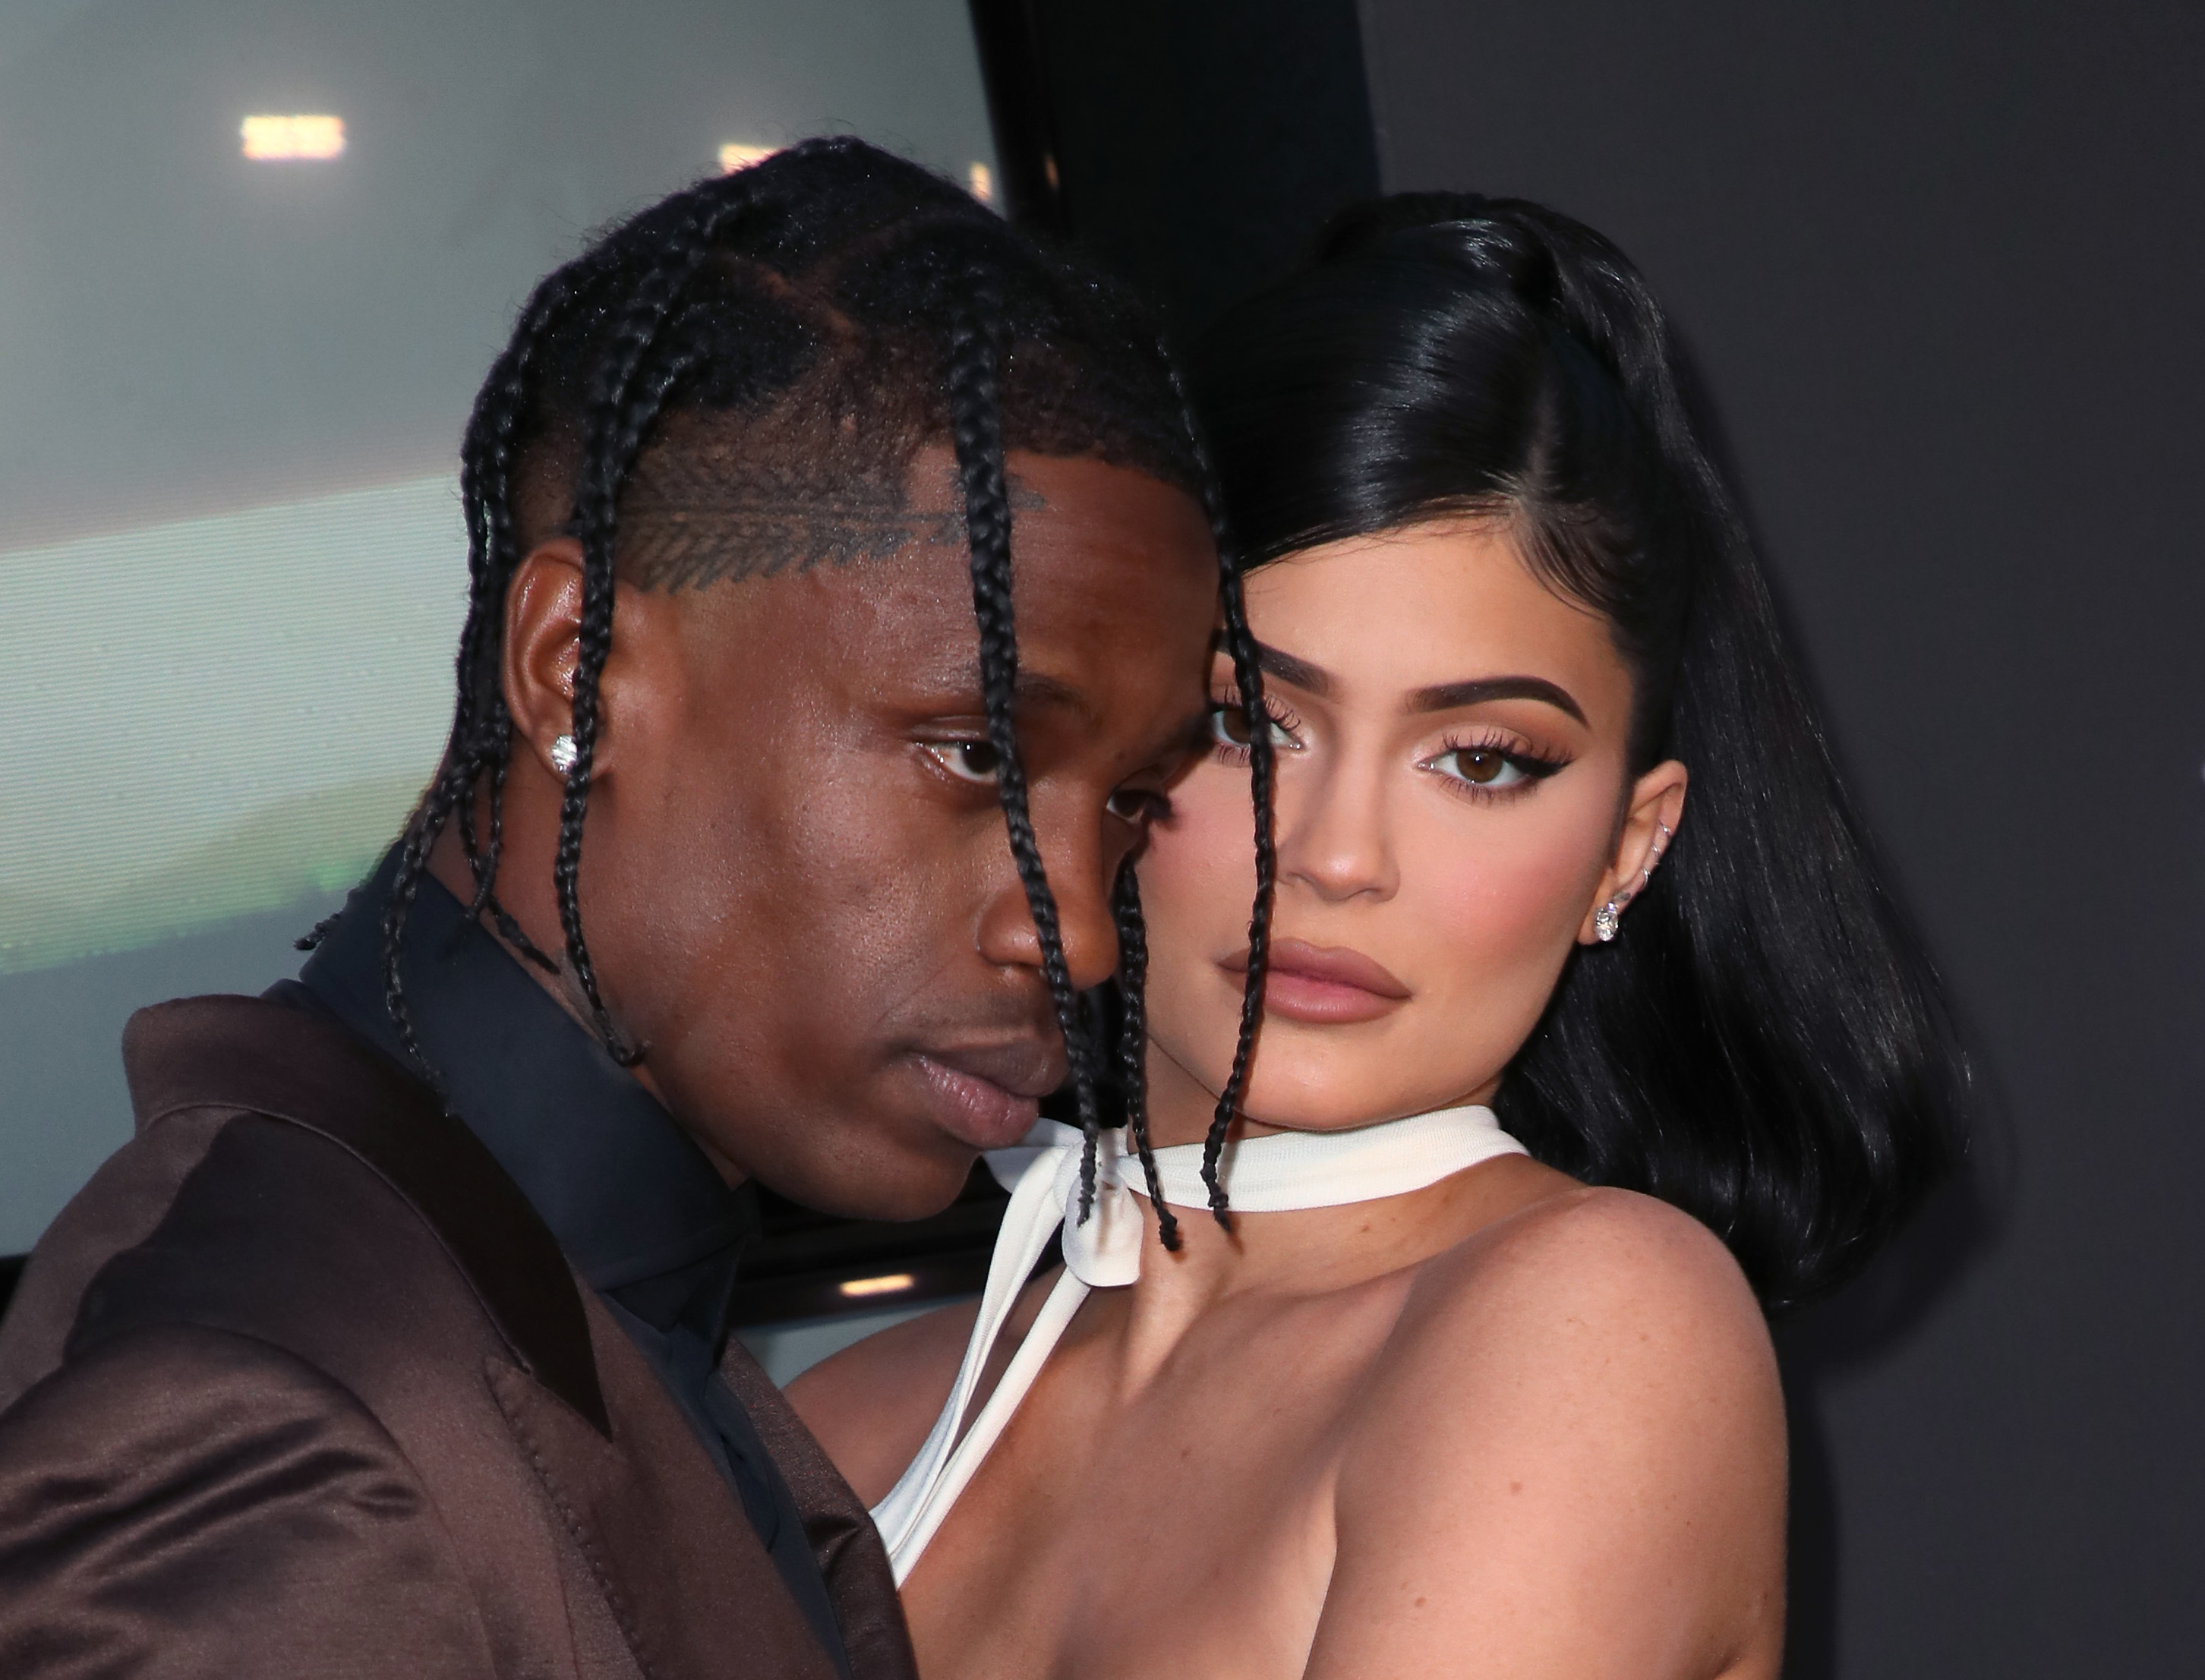 Kylie Jenner says she and Travis Scott 'weren't aware of any